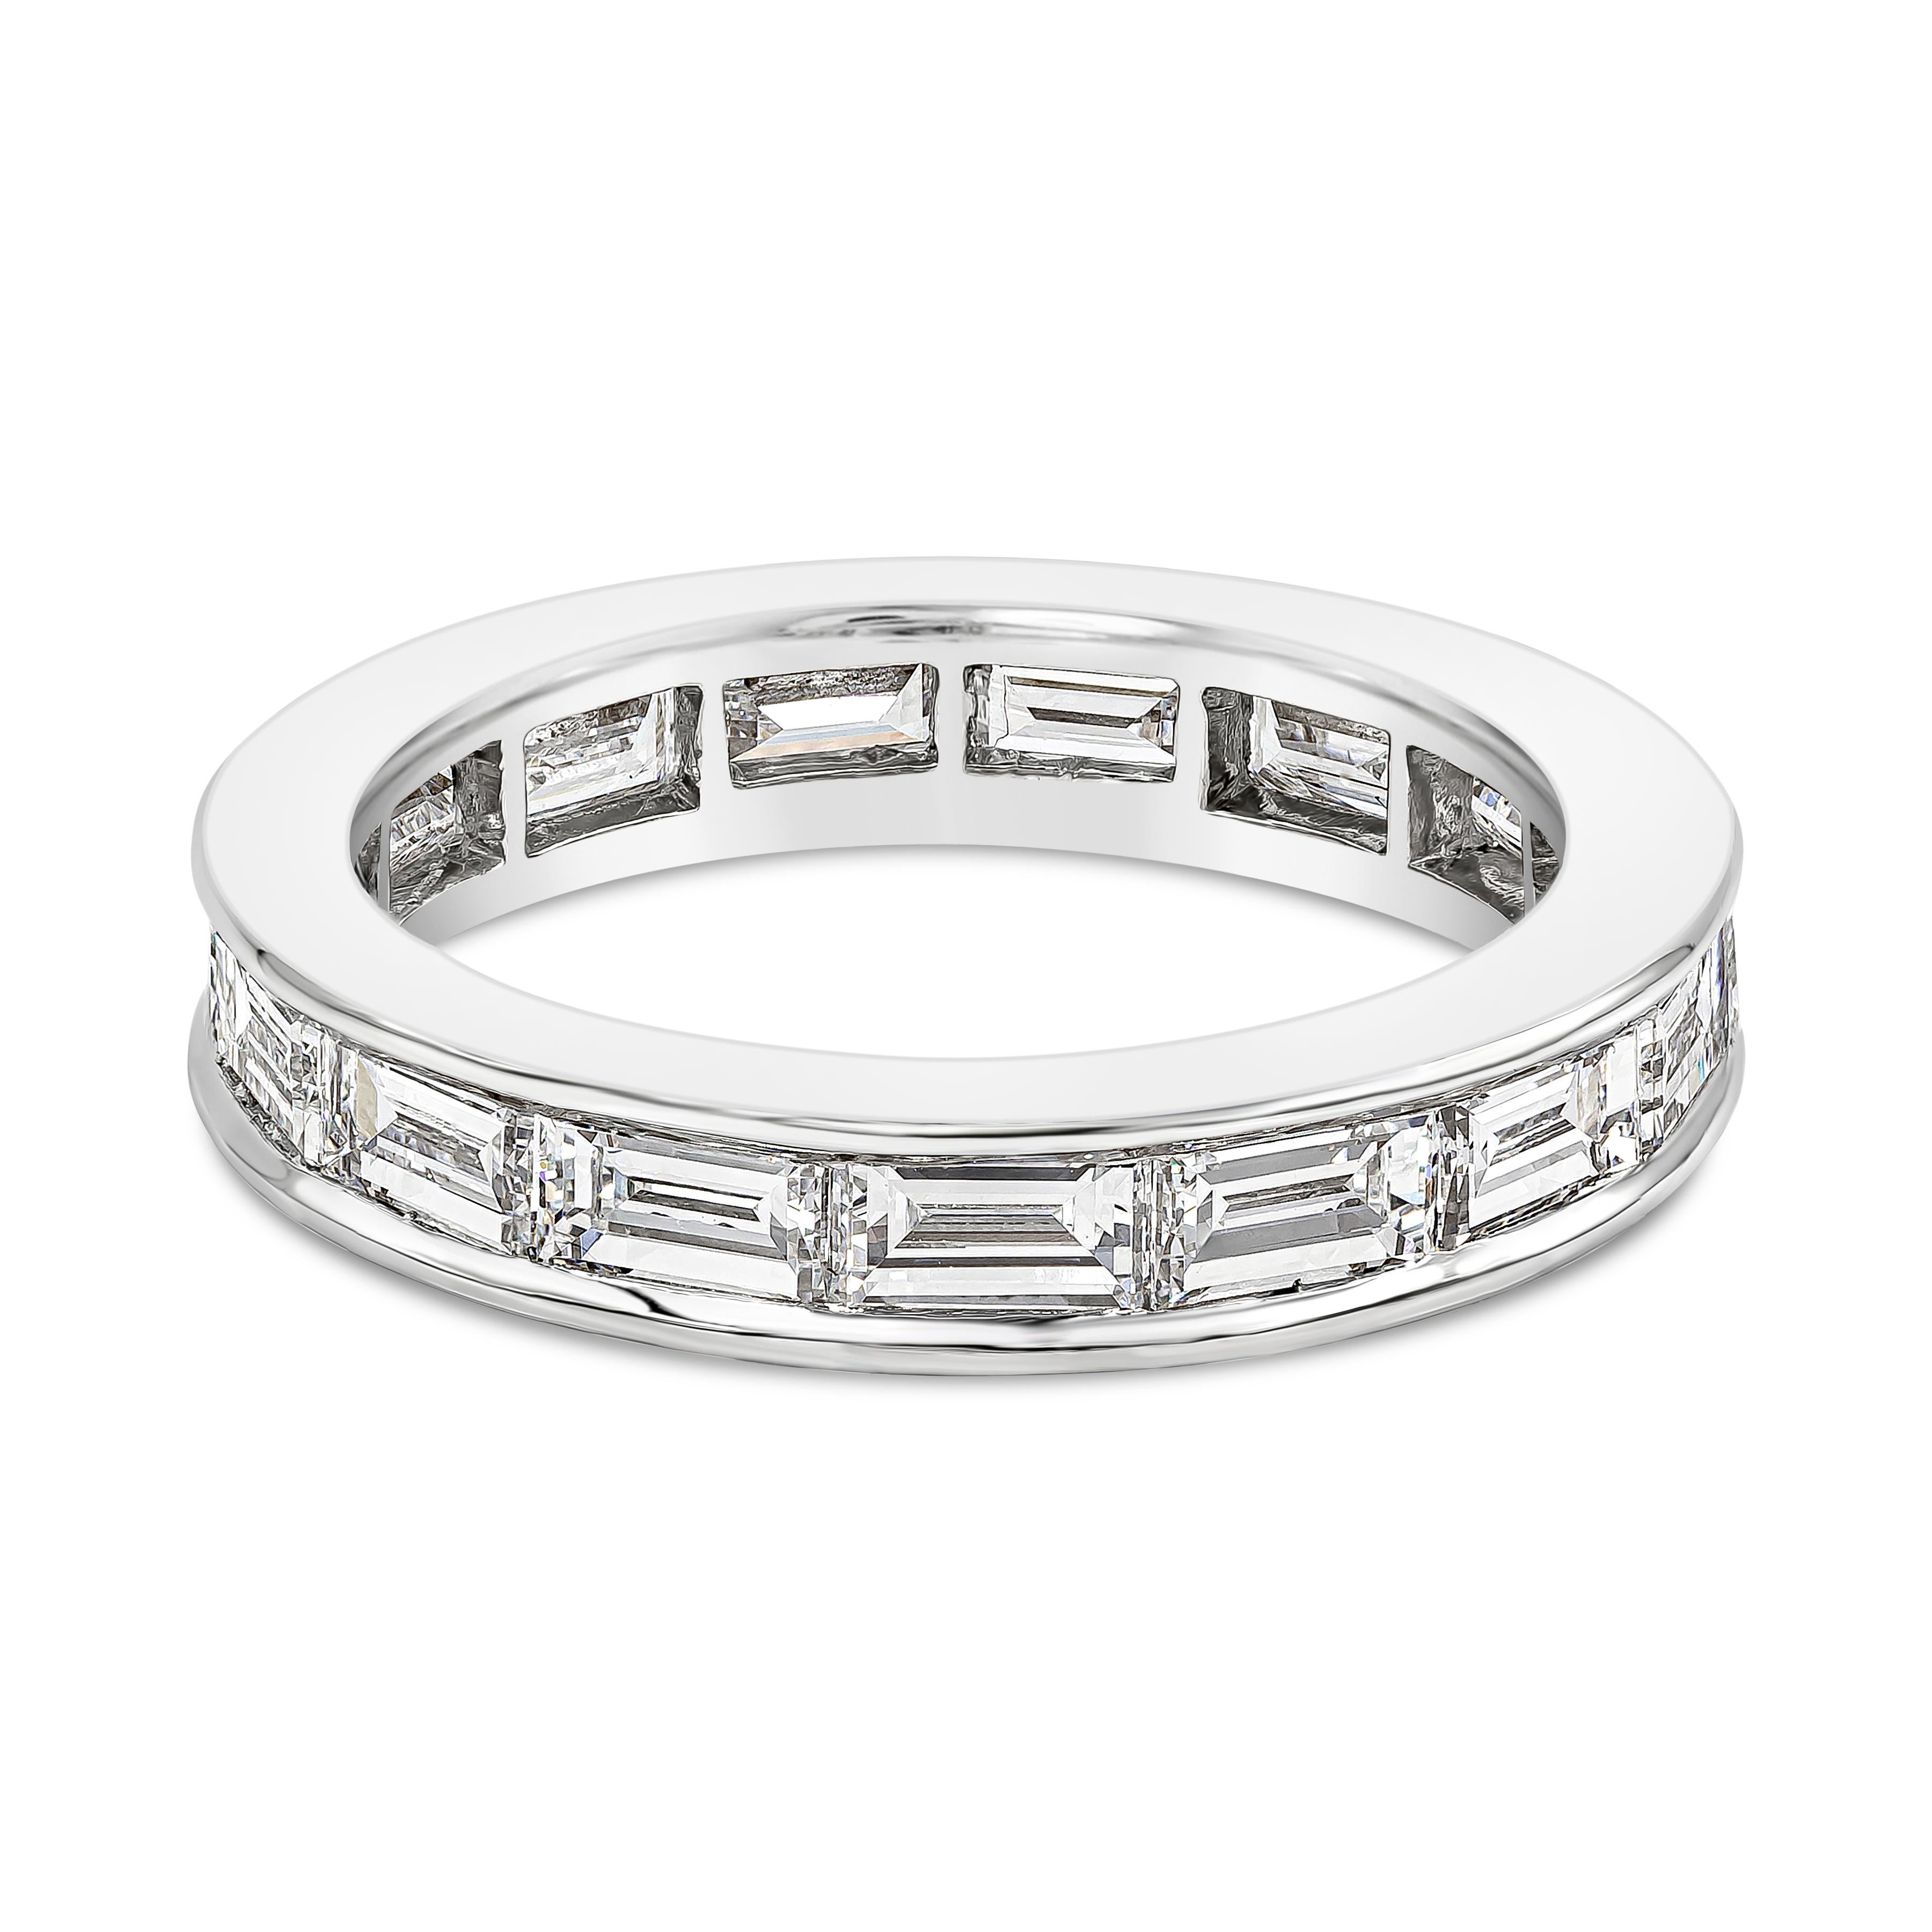 A beautiful wedding band part of the Romance collection by Van Cleef and Arpels. Showcasing a row of baguette diamonds weighing 1.65 carats total, set in a beautiful channel set and made in platinum. Diamonds are approximately D-E color, VVS in